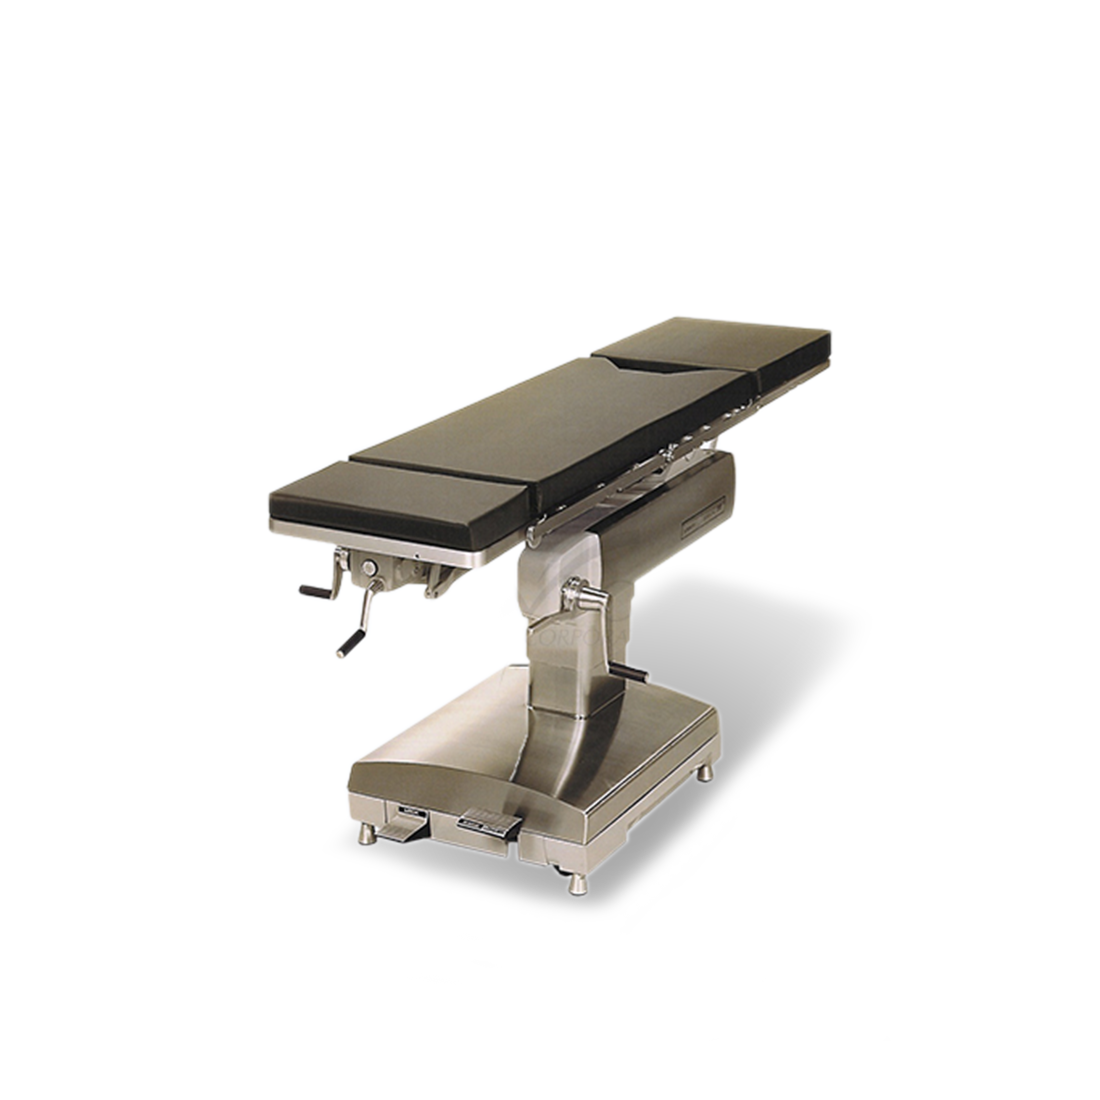 Steris Amsco 2080L General Surgical Table